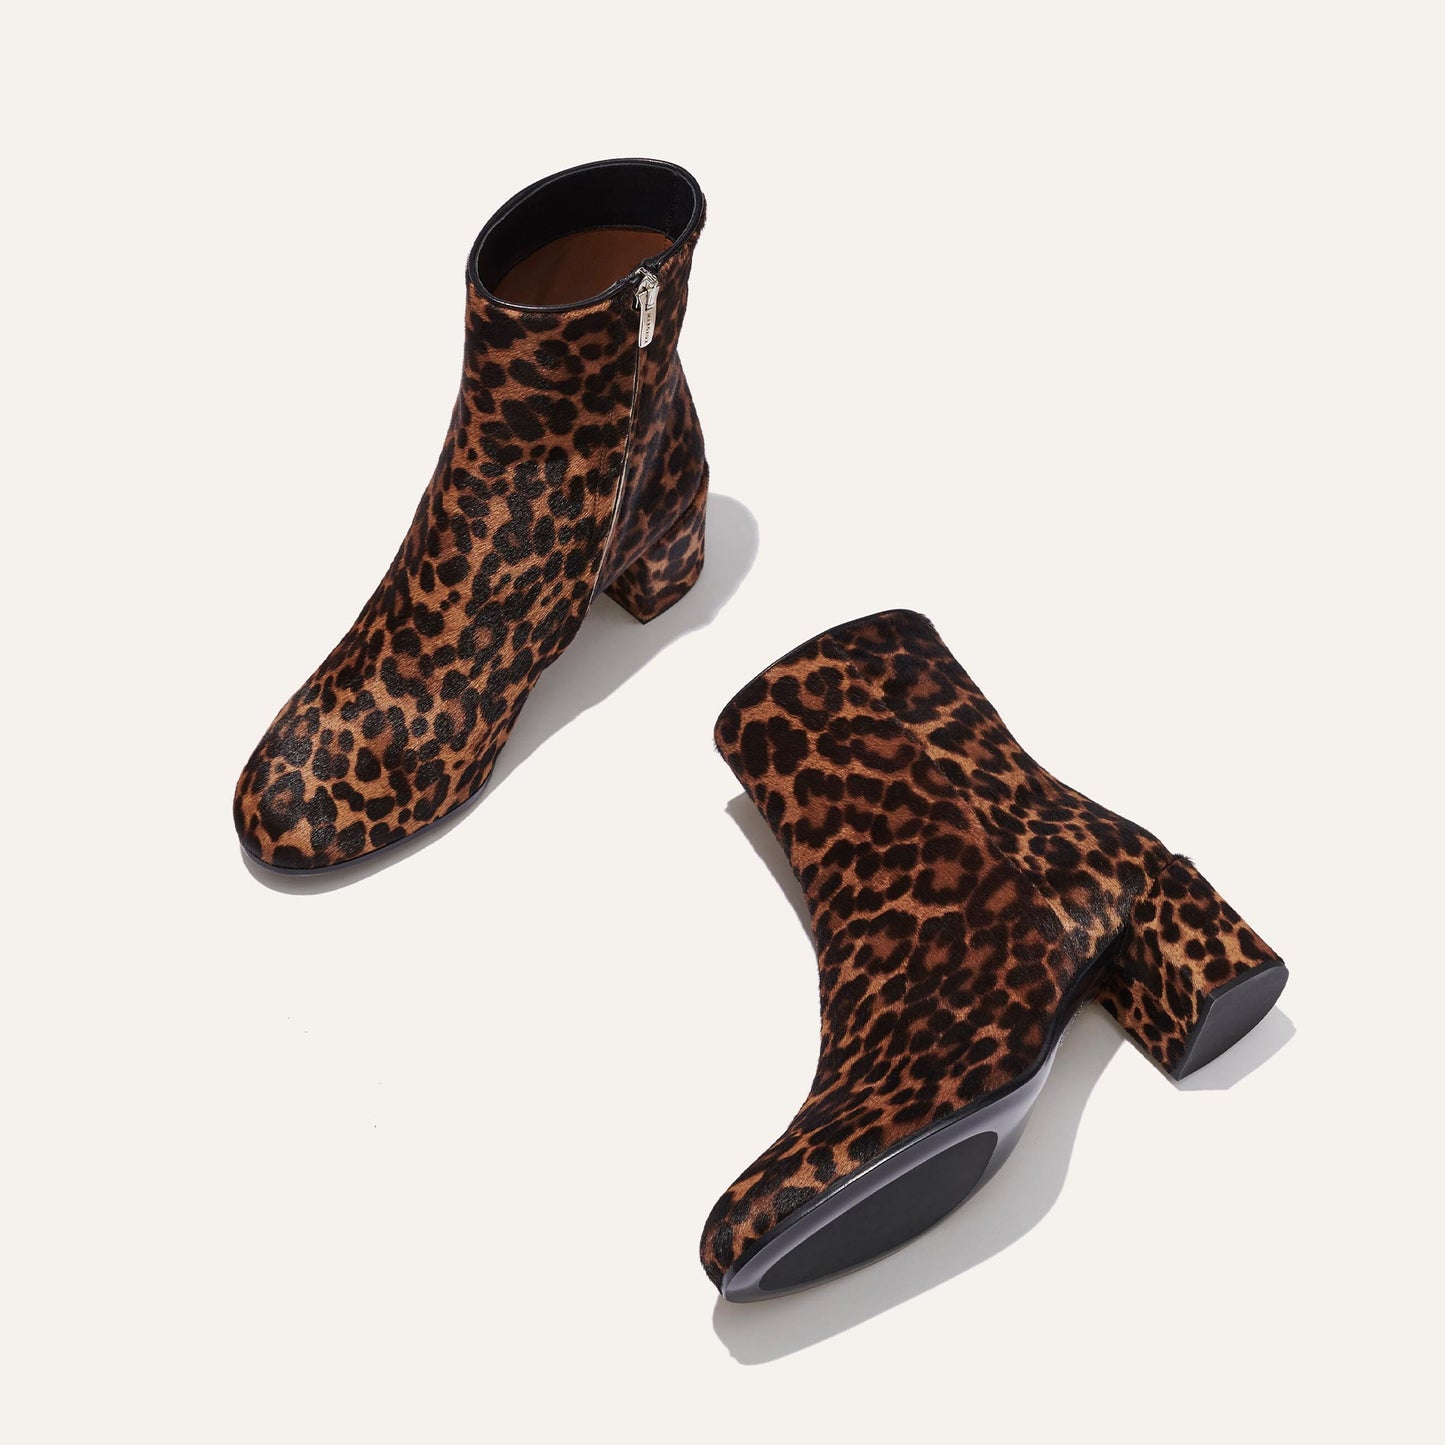 The Boot - Chocolate Leopard Haircalf